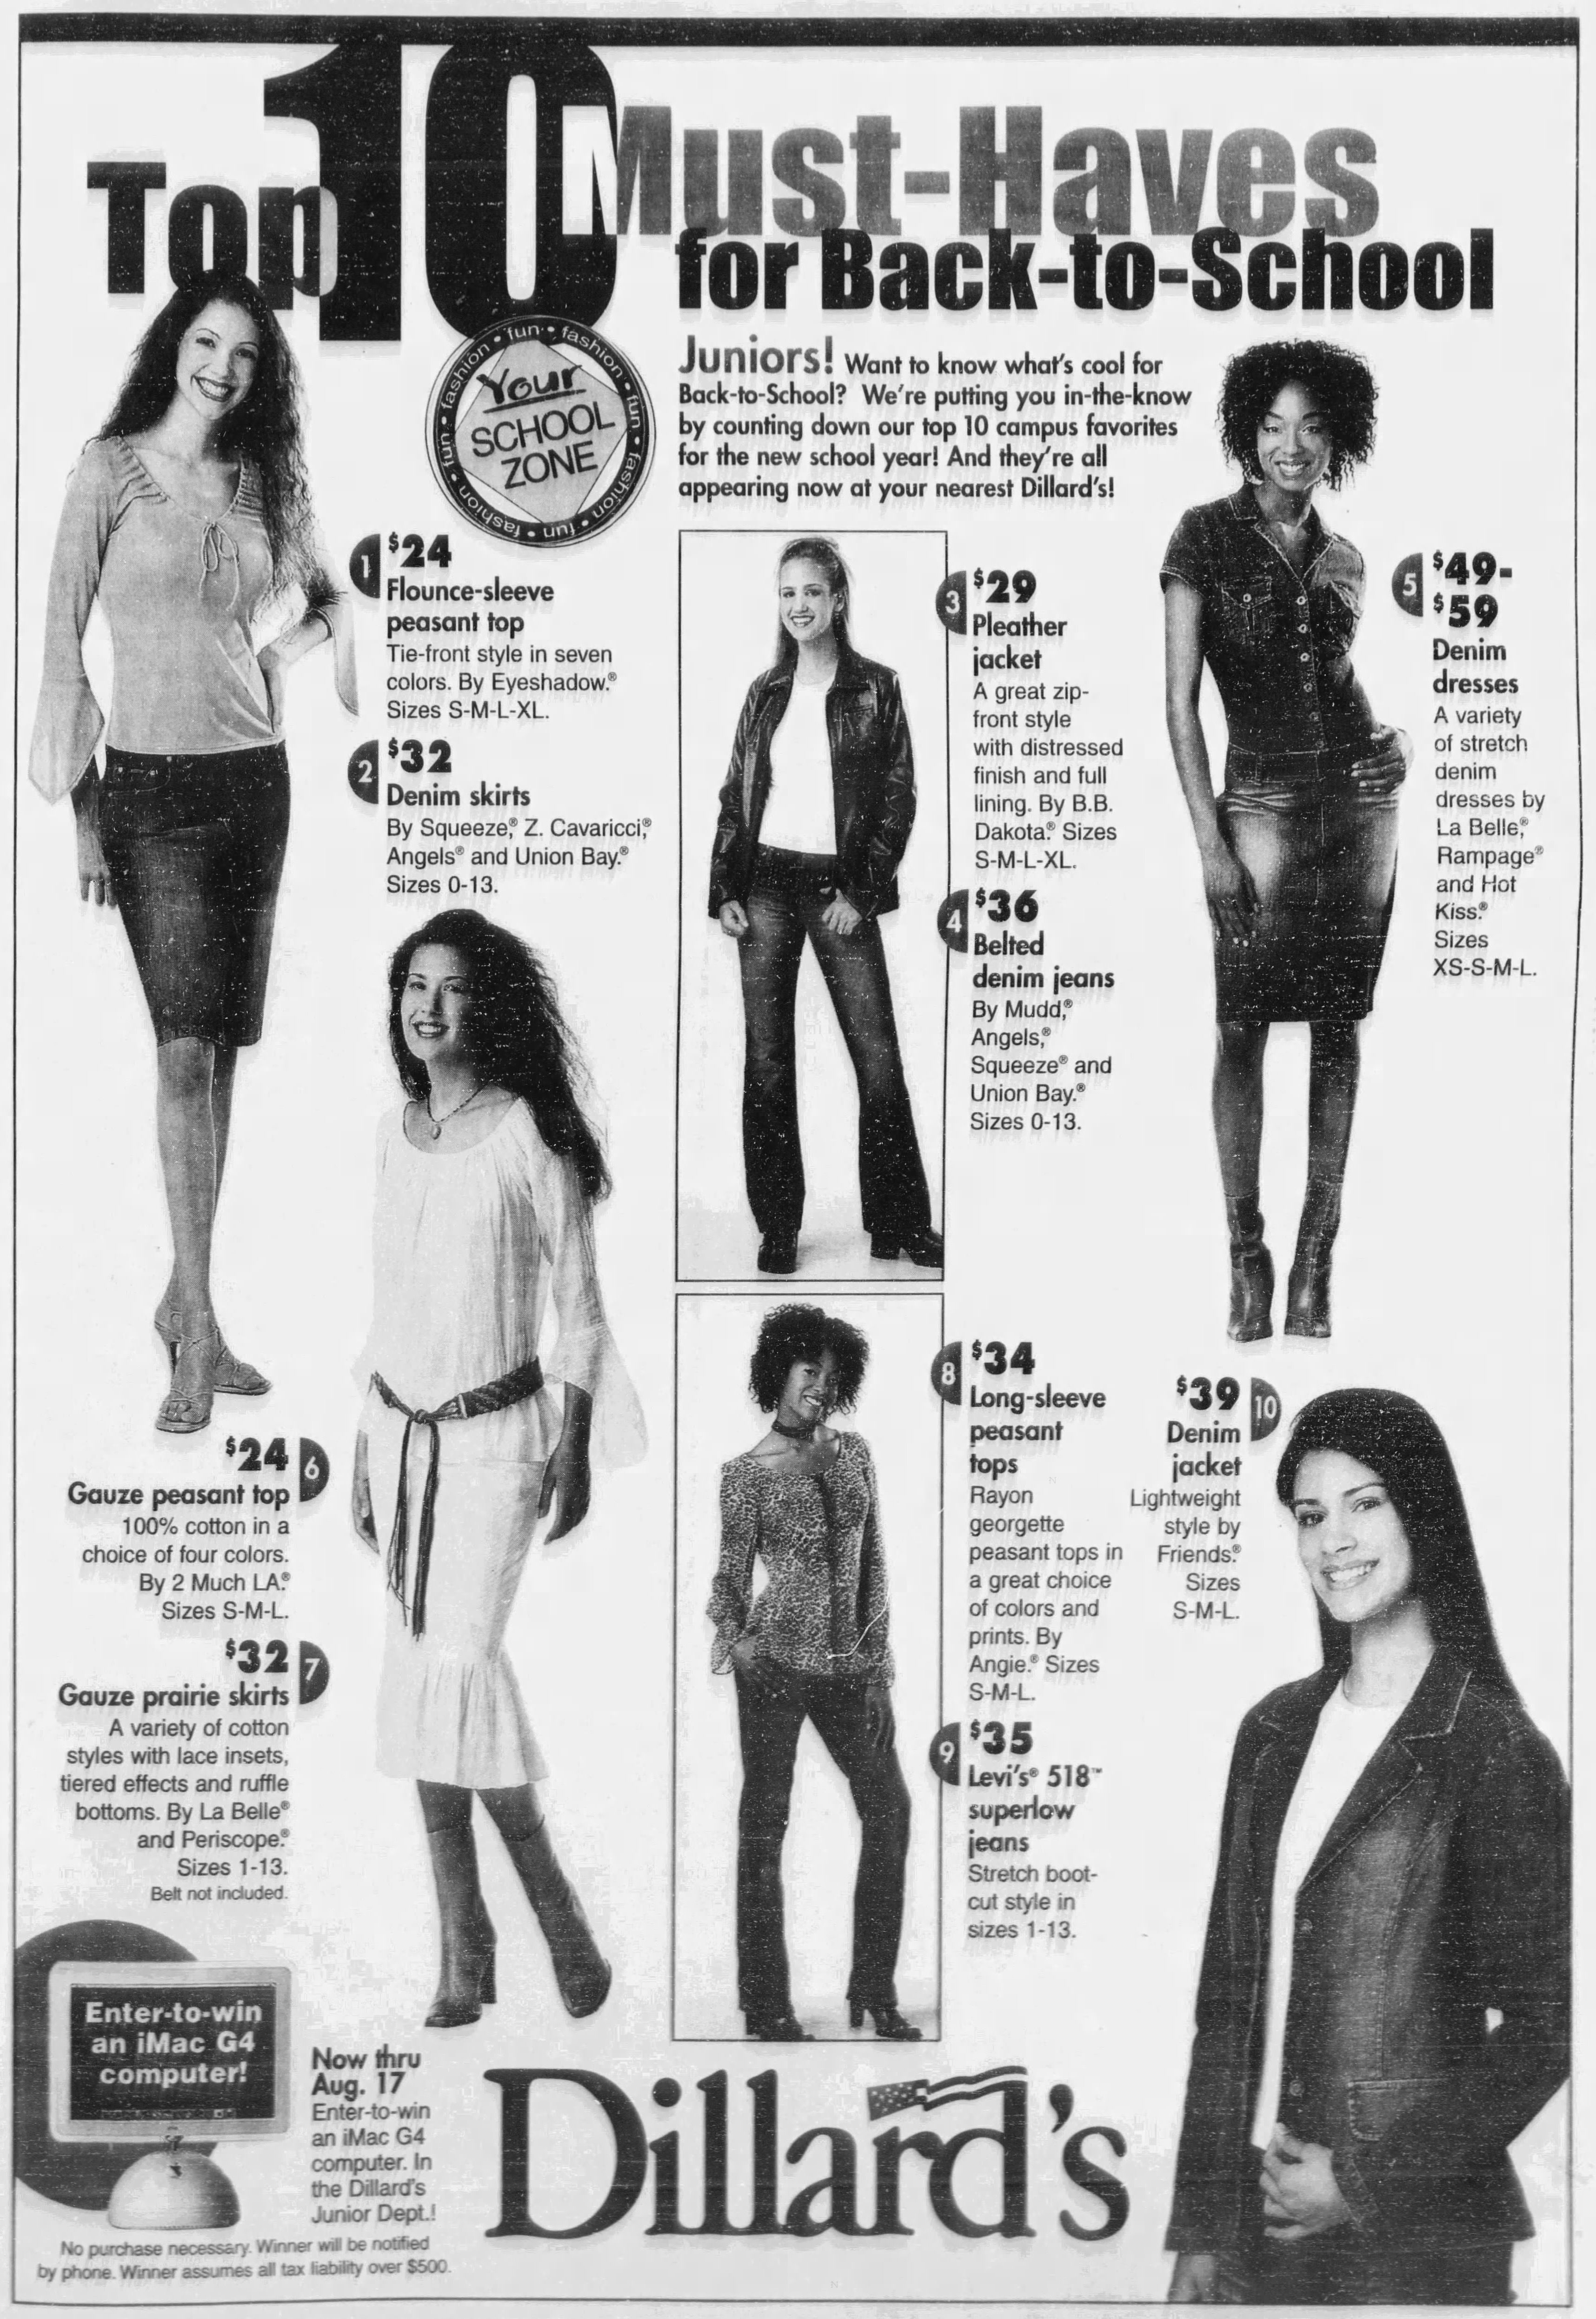 Back-to-school 2002 ads feature low-rise jeans, dresses, and skirts.